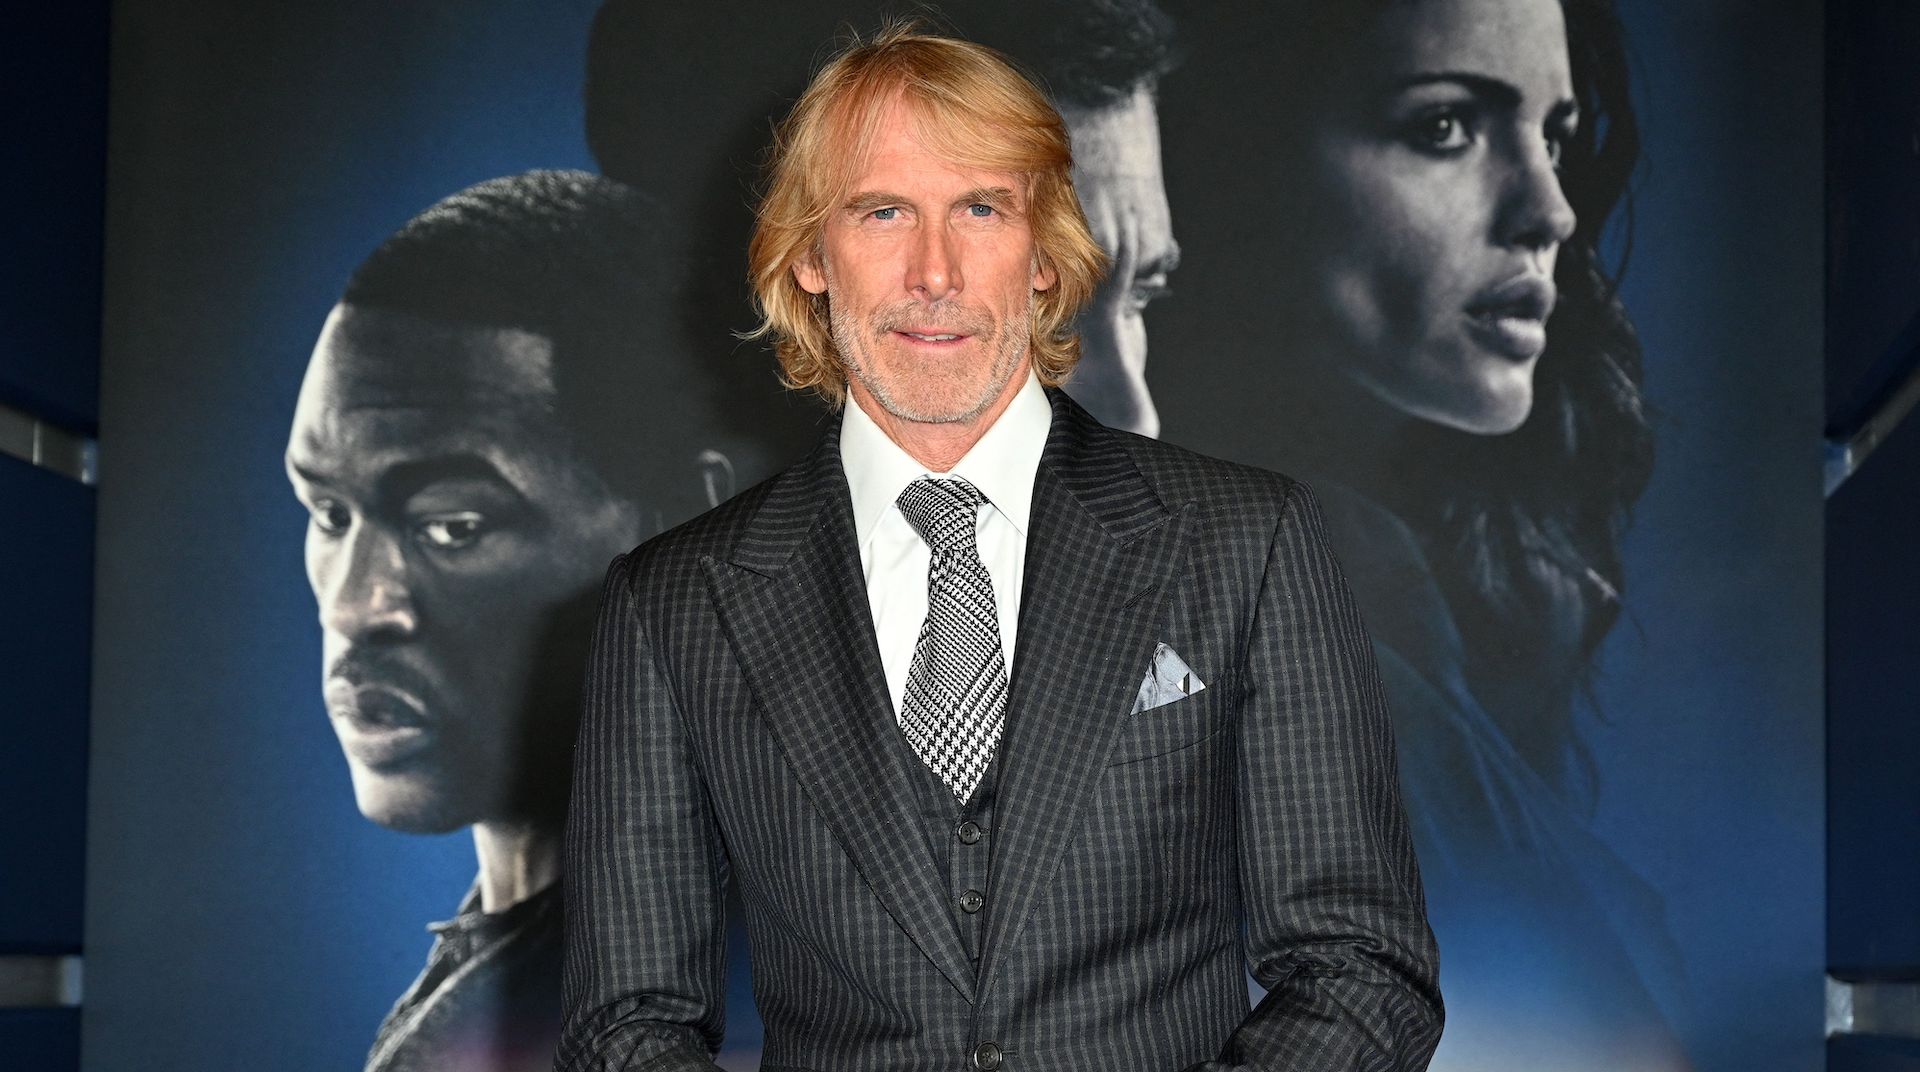 Michael Bay on Bruce Willis: ‘There are certain people that are movie stars. He was one of them’